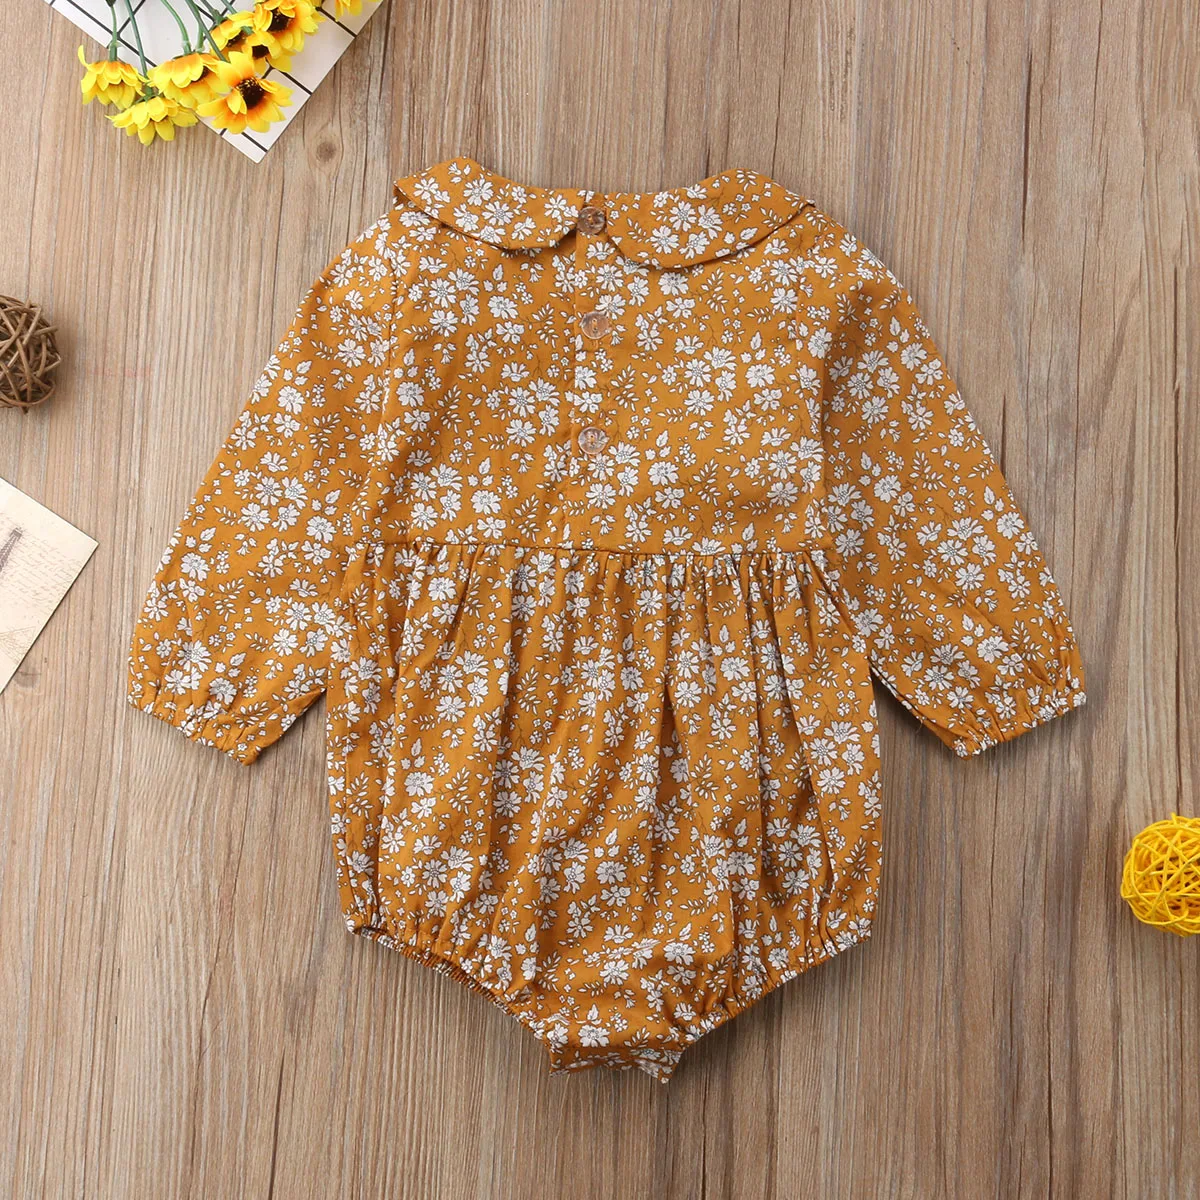 

2020 New Fashion Spring Autumn Toddler Girls Bodysuits Long Sleeve Flowers Peter Pan Collar Jumpsuits Playsuit Yellow Outfit